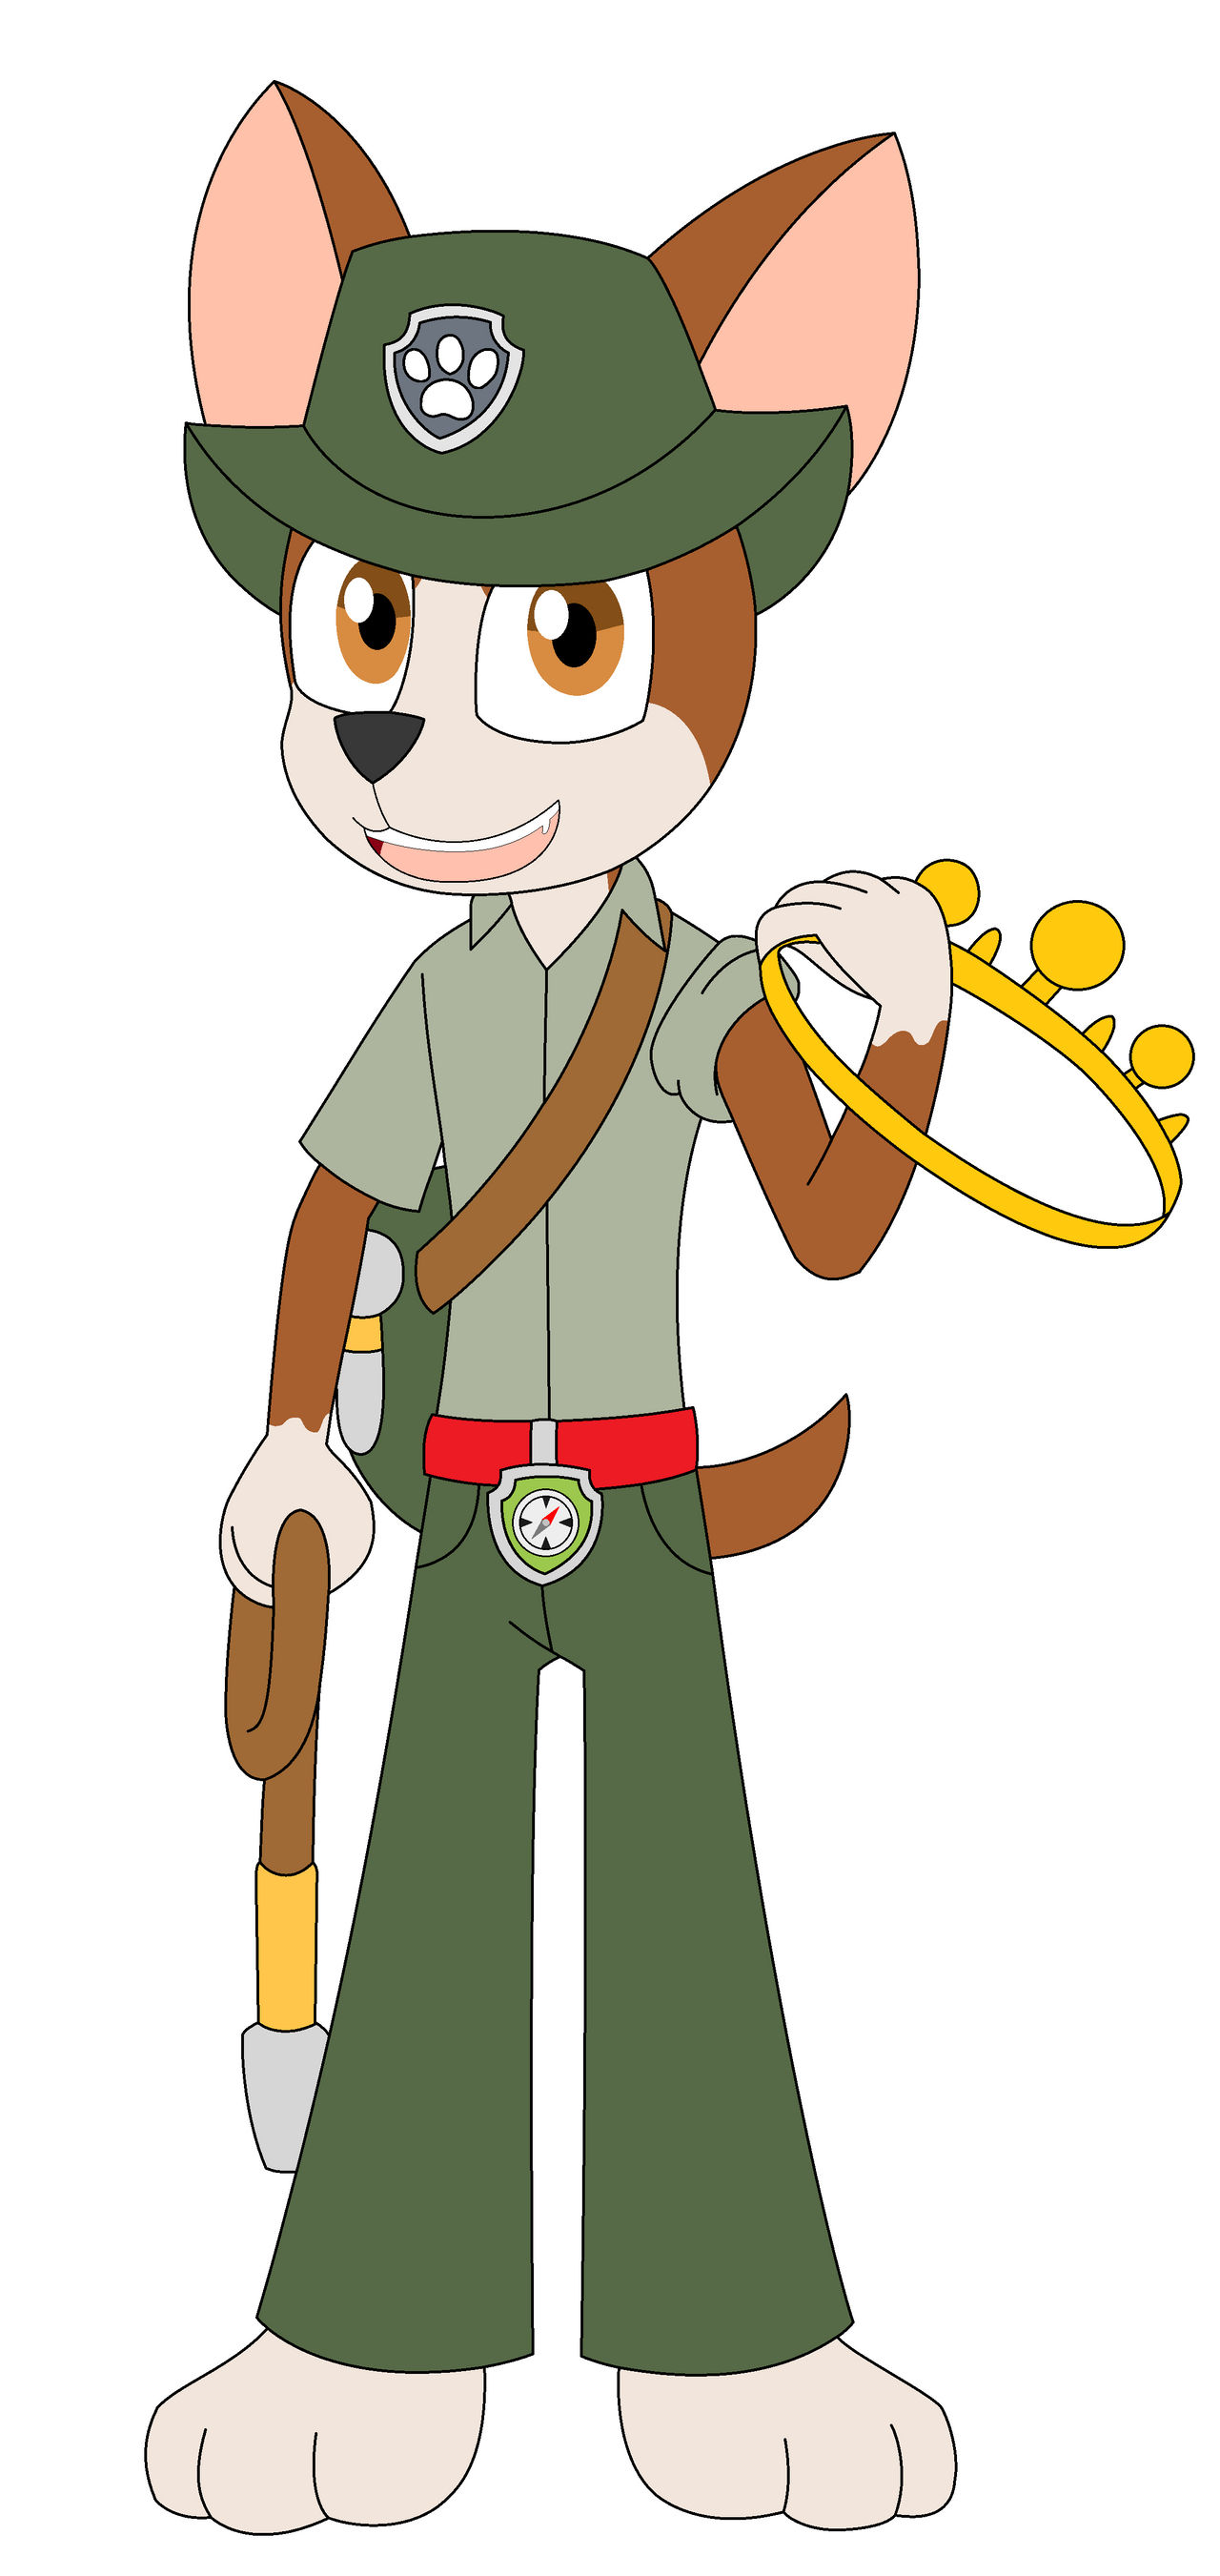 Adgang Calamity Downtown PAW Patrol - Tracker the Jungle Pup - Anthro Form by PAWPatrolUCS2019 on  DeviantArt